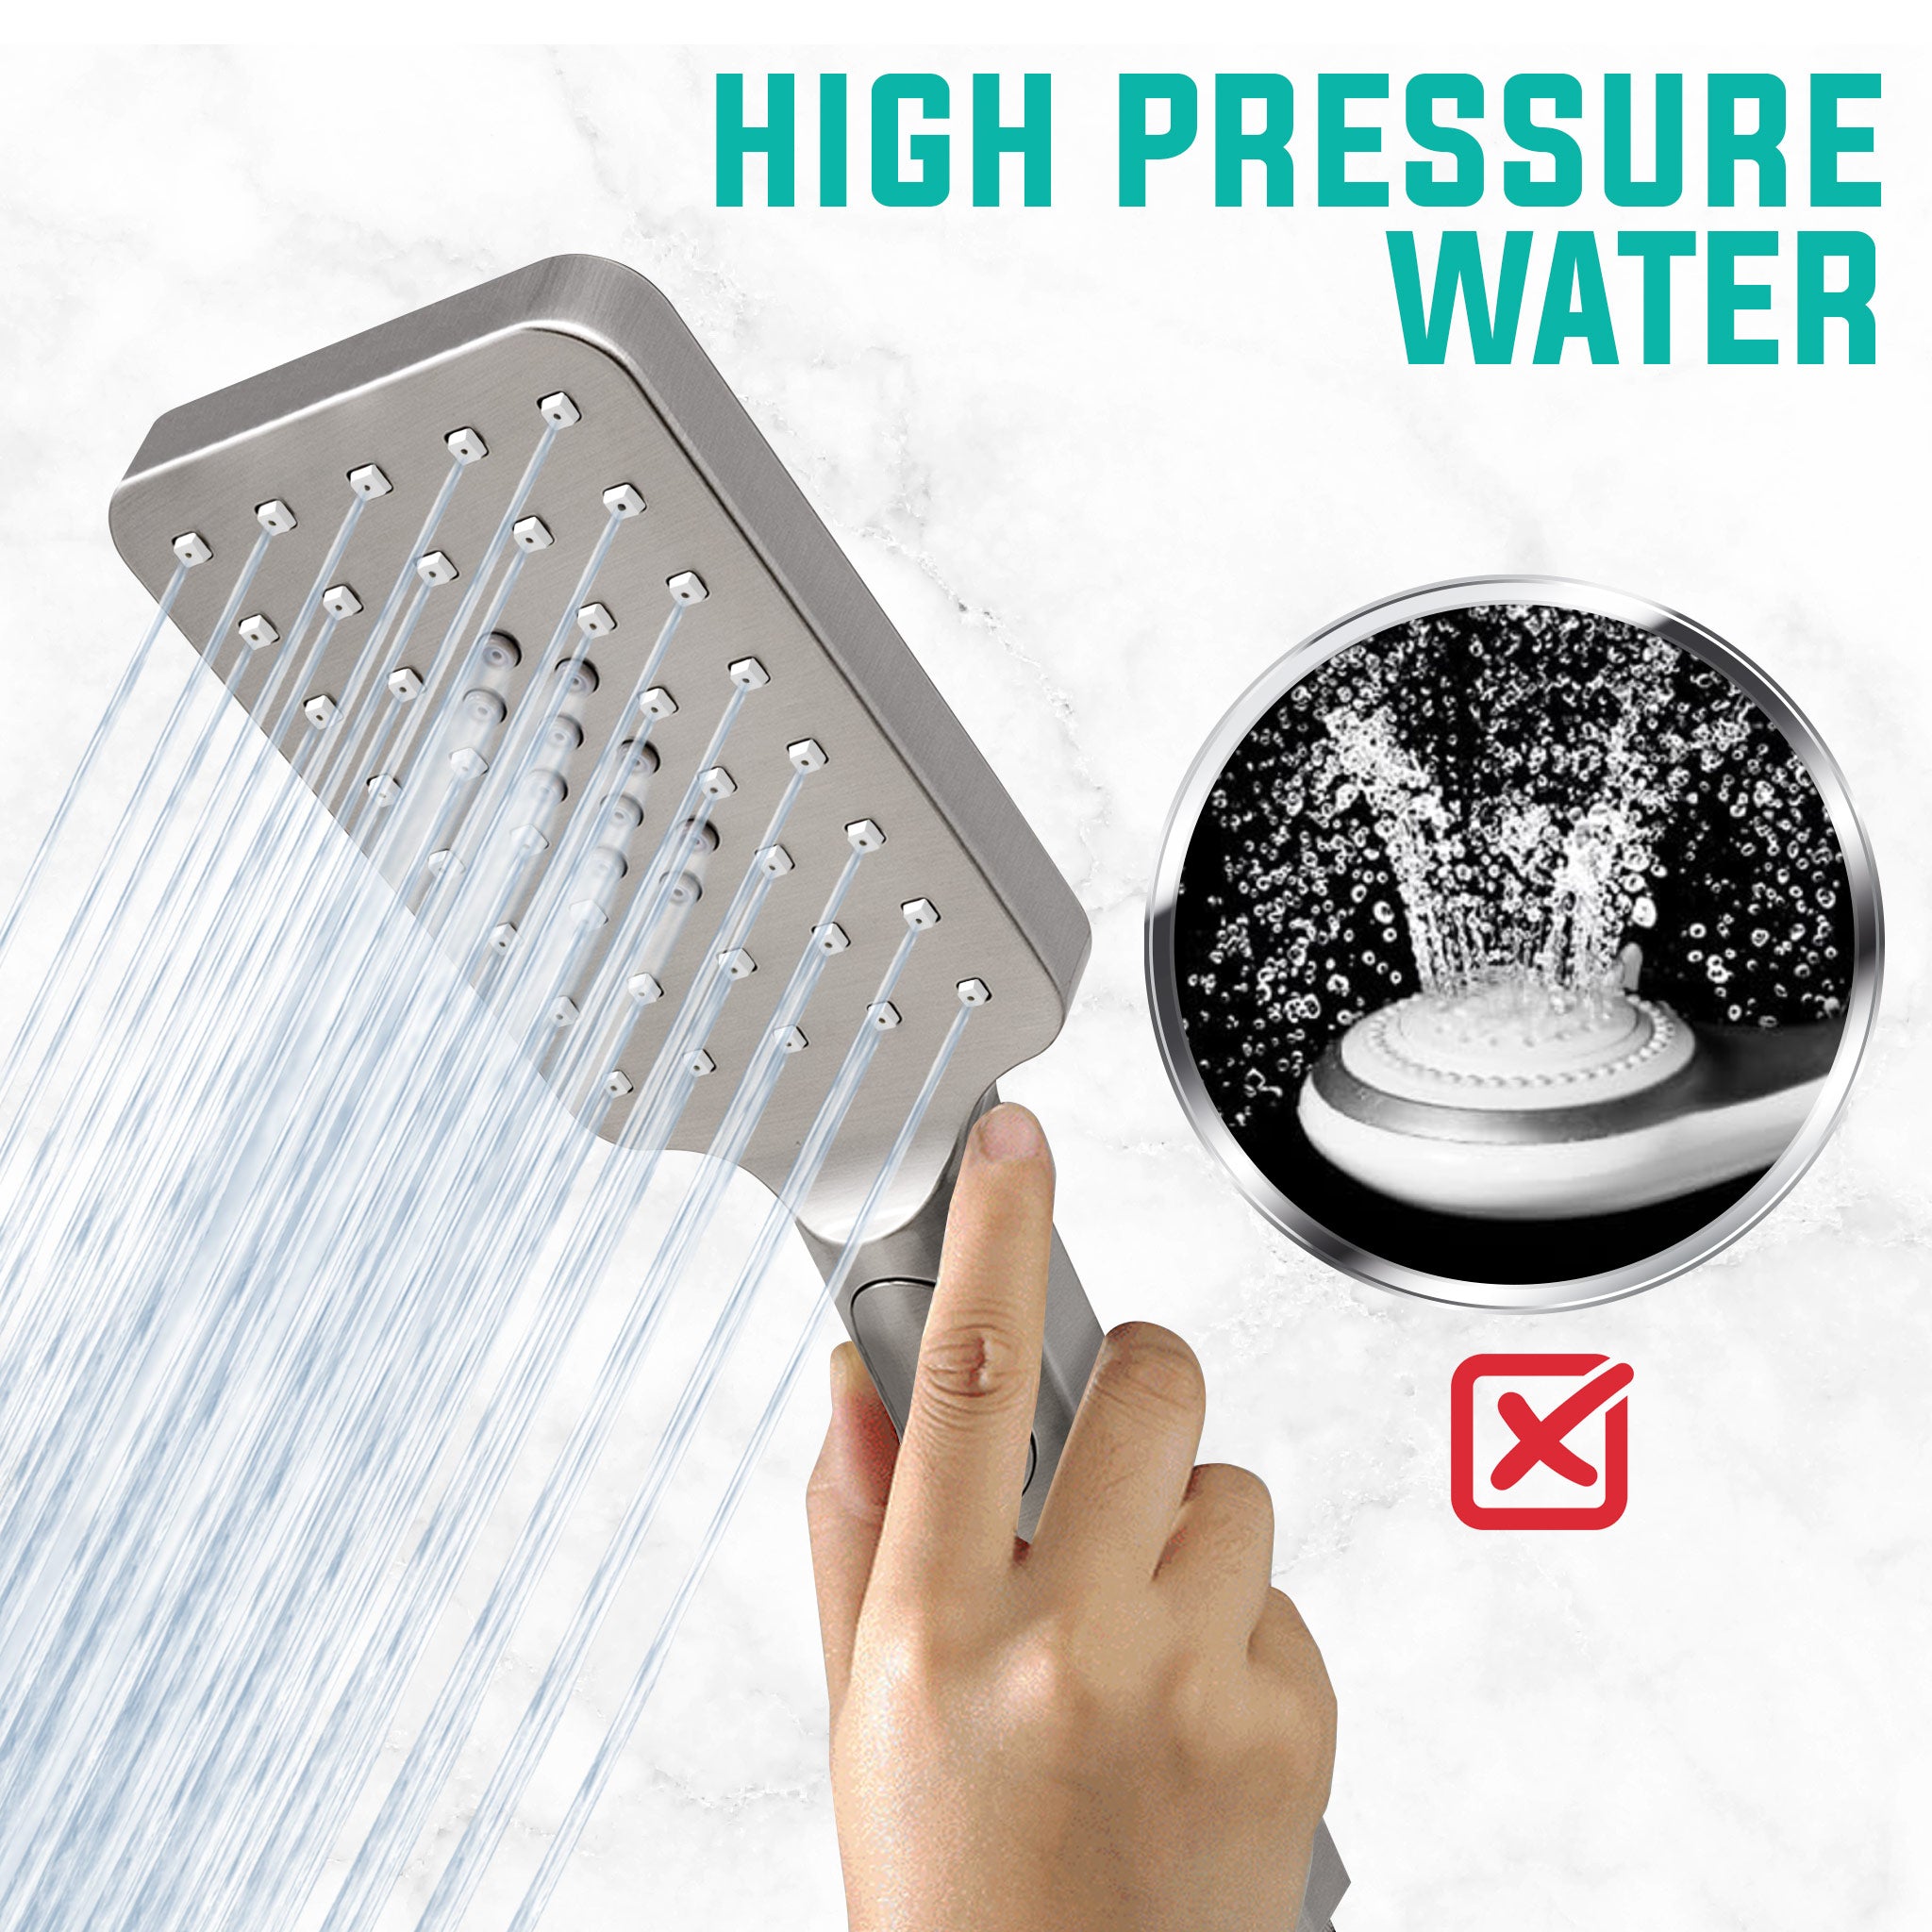 Metpure High-Pressure Handheld Shower Head with Easy Clicker for Multiple Sprays. Low Profile Lightweight Rectangular Shower Head. Stainless Steel Hose & Adjustable Mount Holder. Brushed Nickel Finish